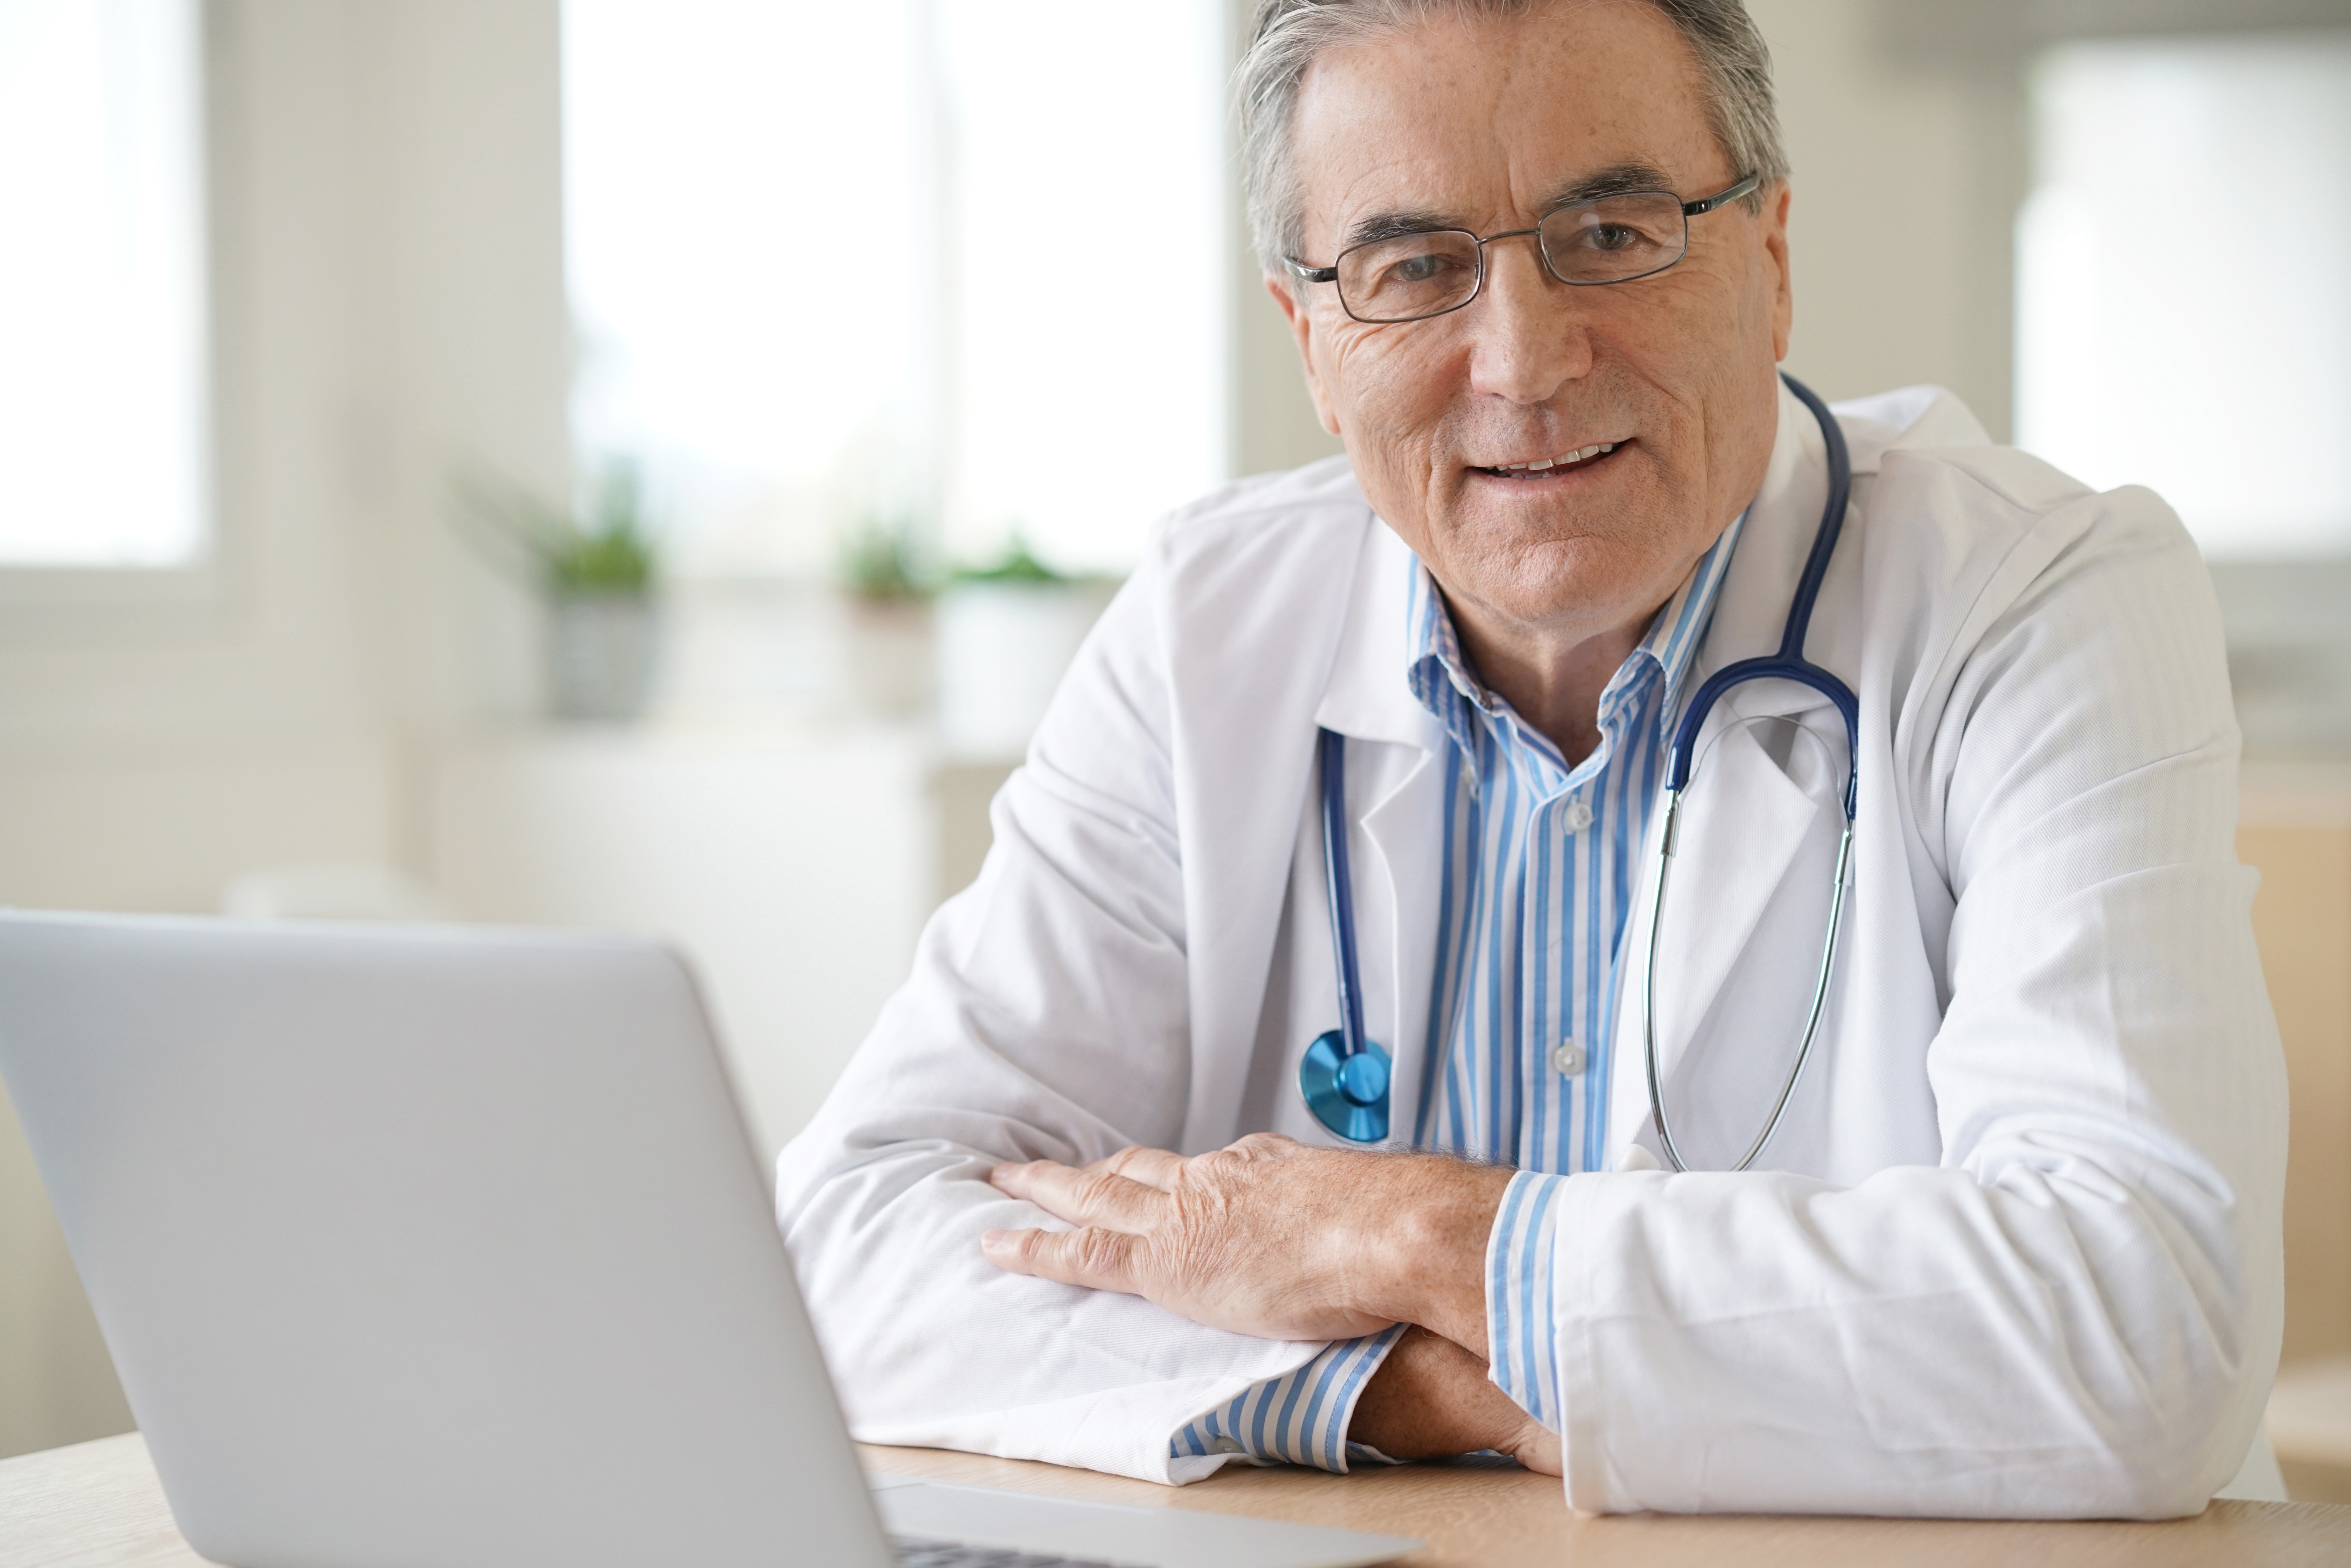 A medical specialist is sitting at a table with his arms folding over it. He's smiling and looking towards the viewer of the image. There is a laptop in front of him, which he can use for a Top Doctors e-Consultation.